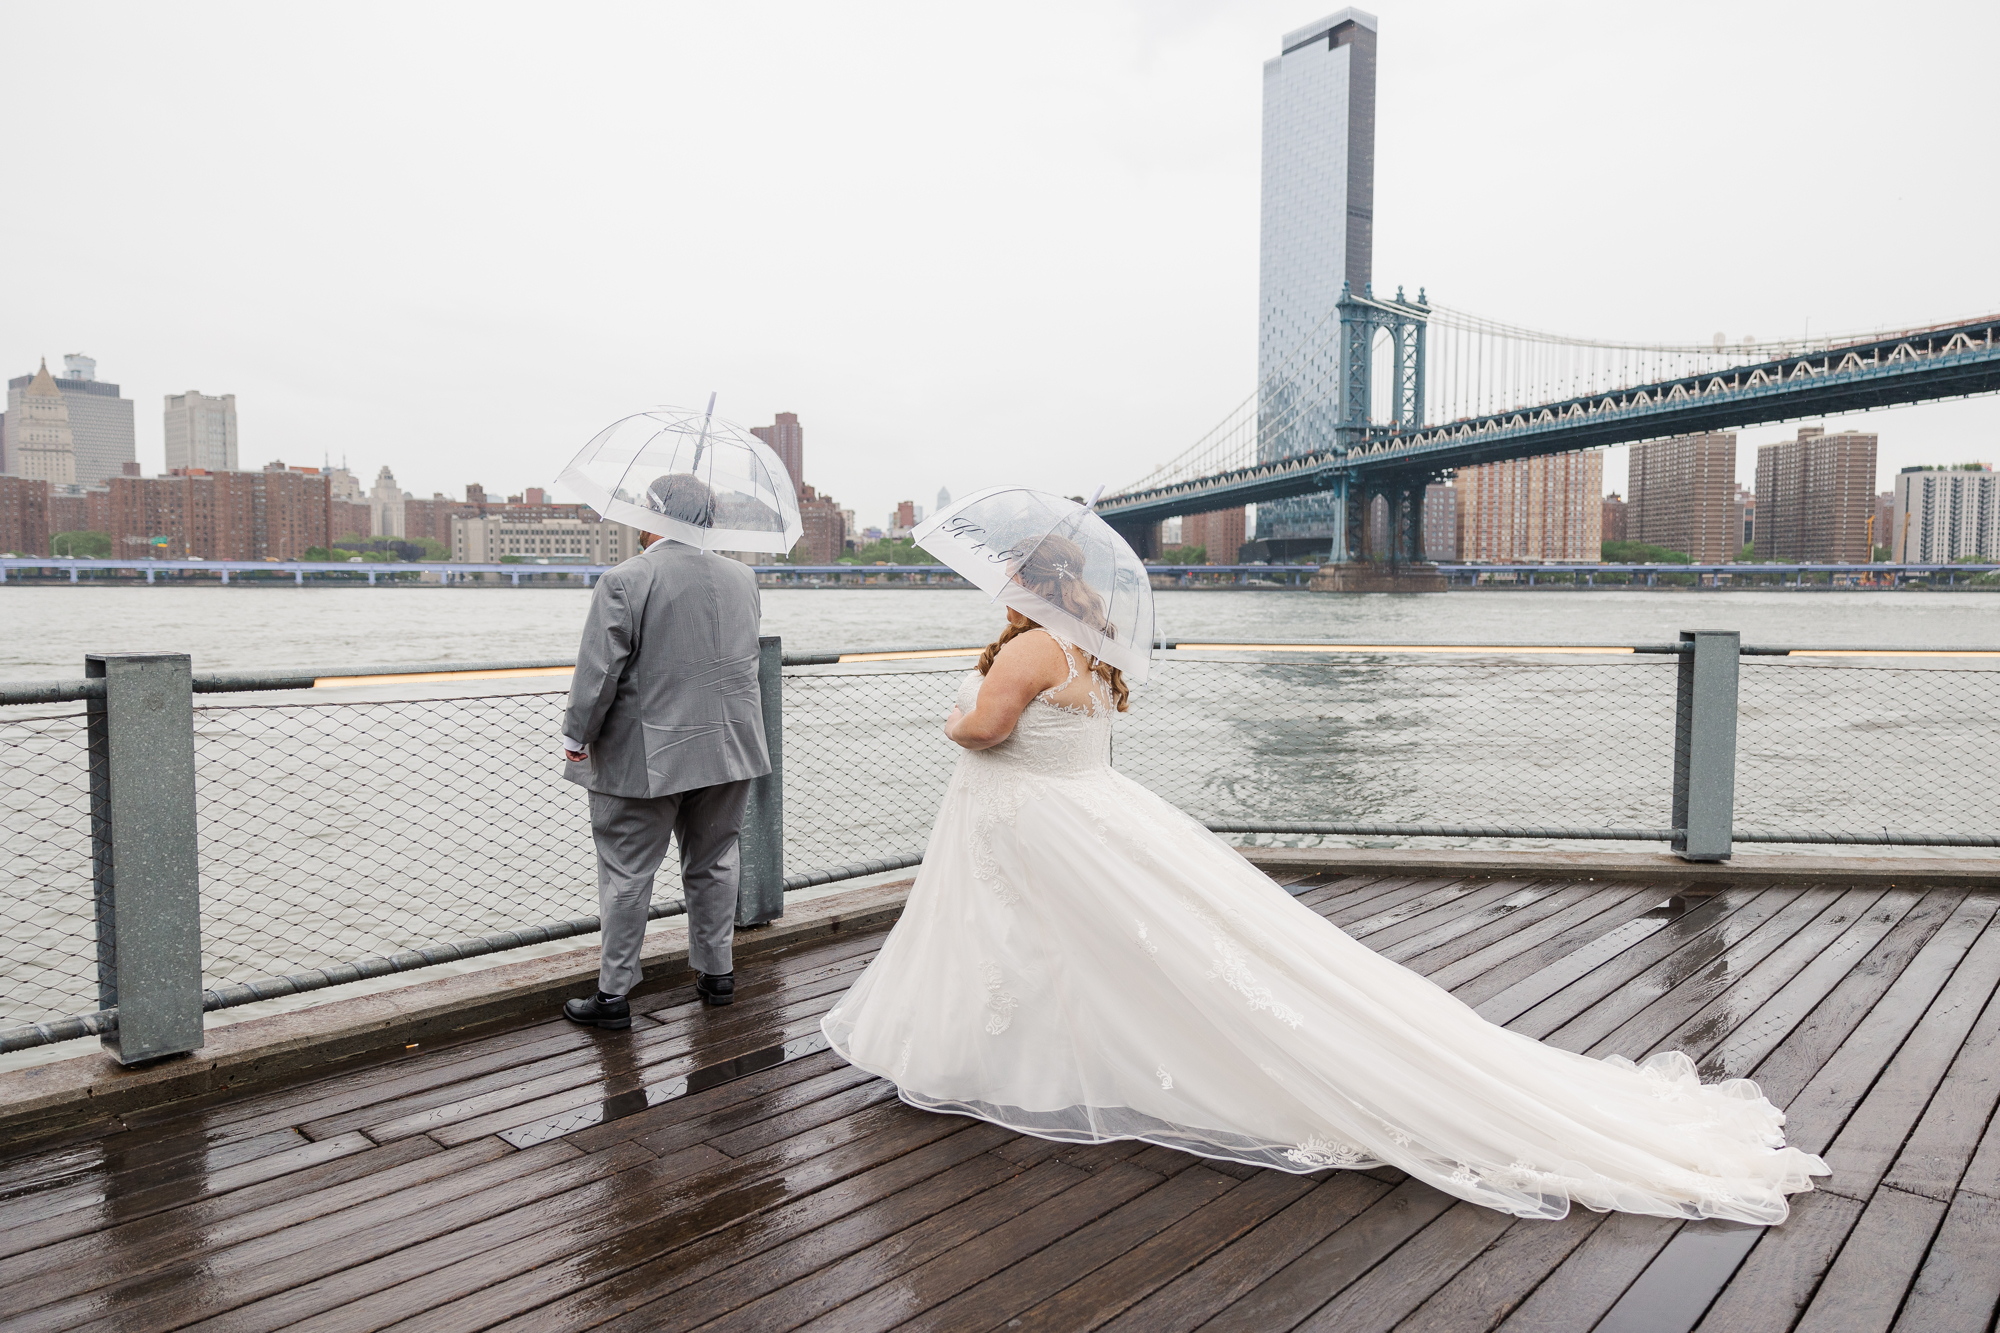 Breath - Taking Wedding Photo Must-Haves, NYC